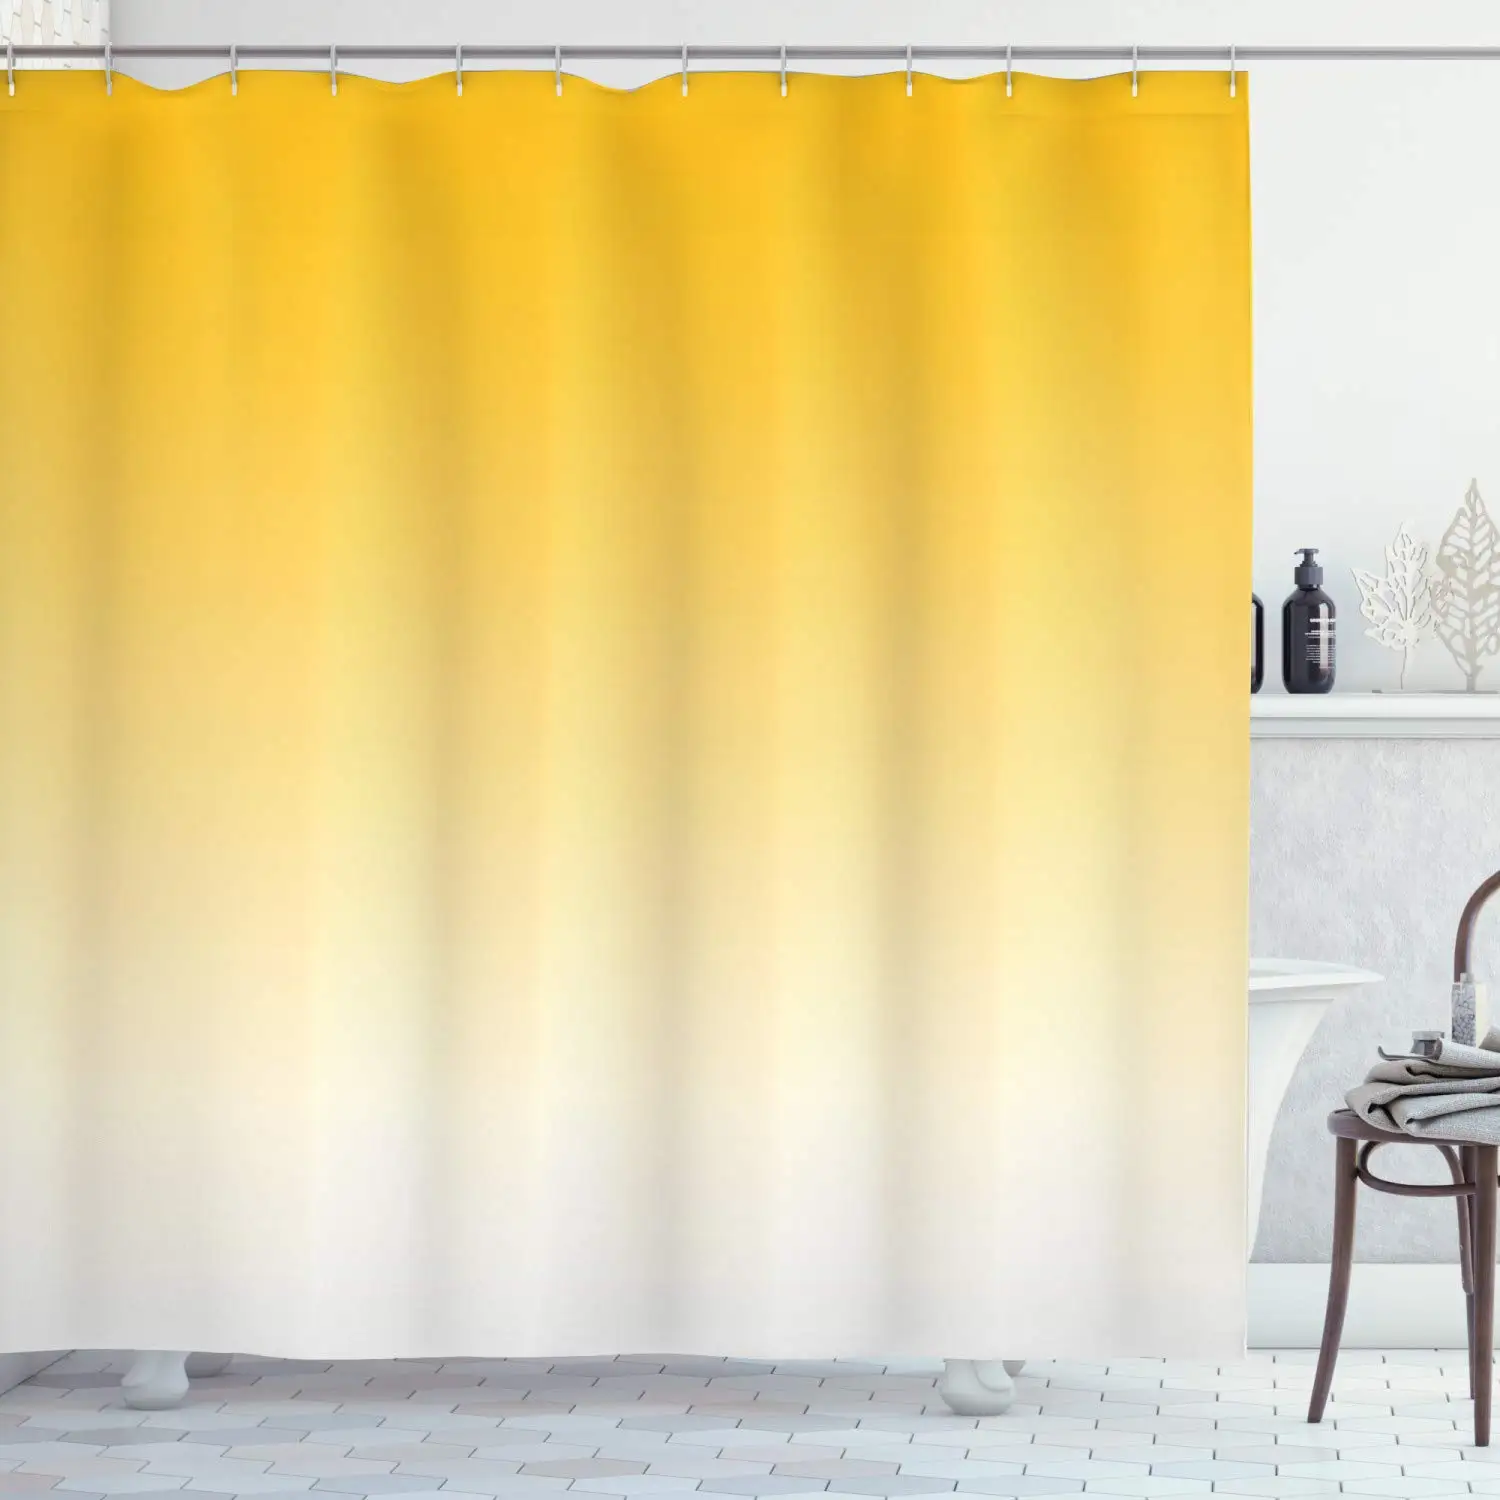 Ombre Shower Curtain, Summer Love on The Beach Theme Inspired for Yellow Lovers Modern Ombre Art Design, Cloth Fabric Bathroom